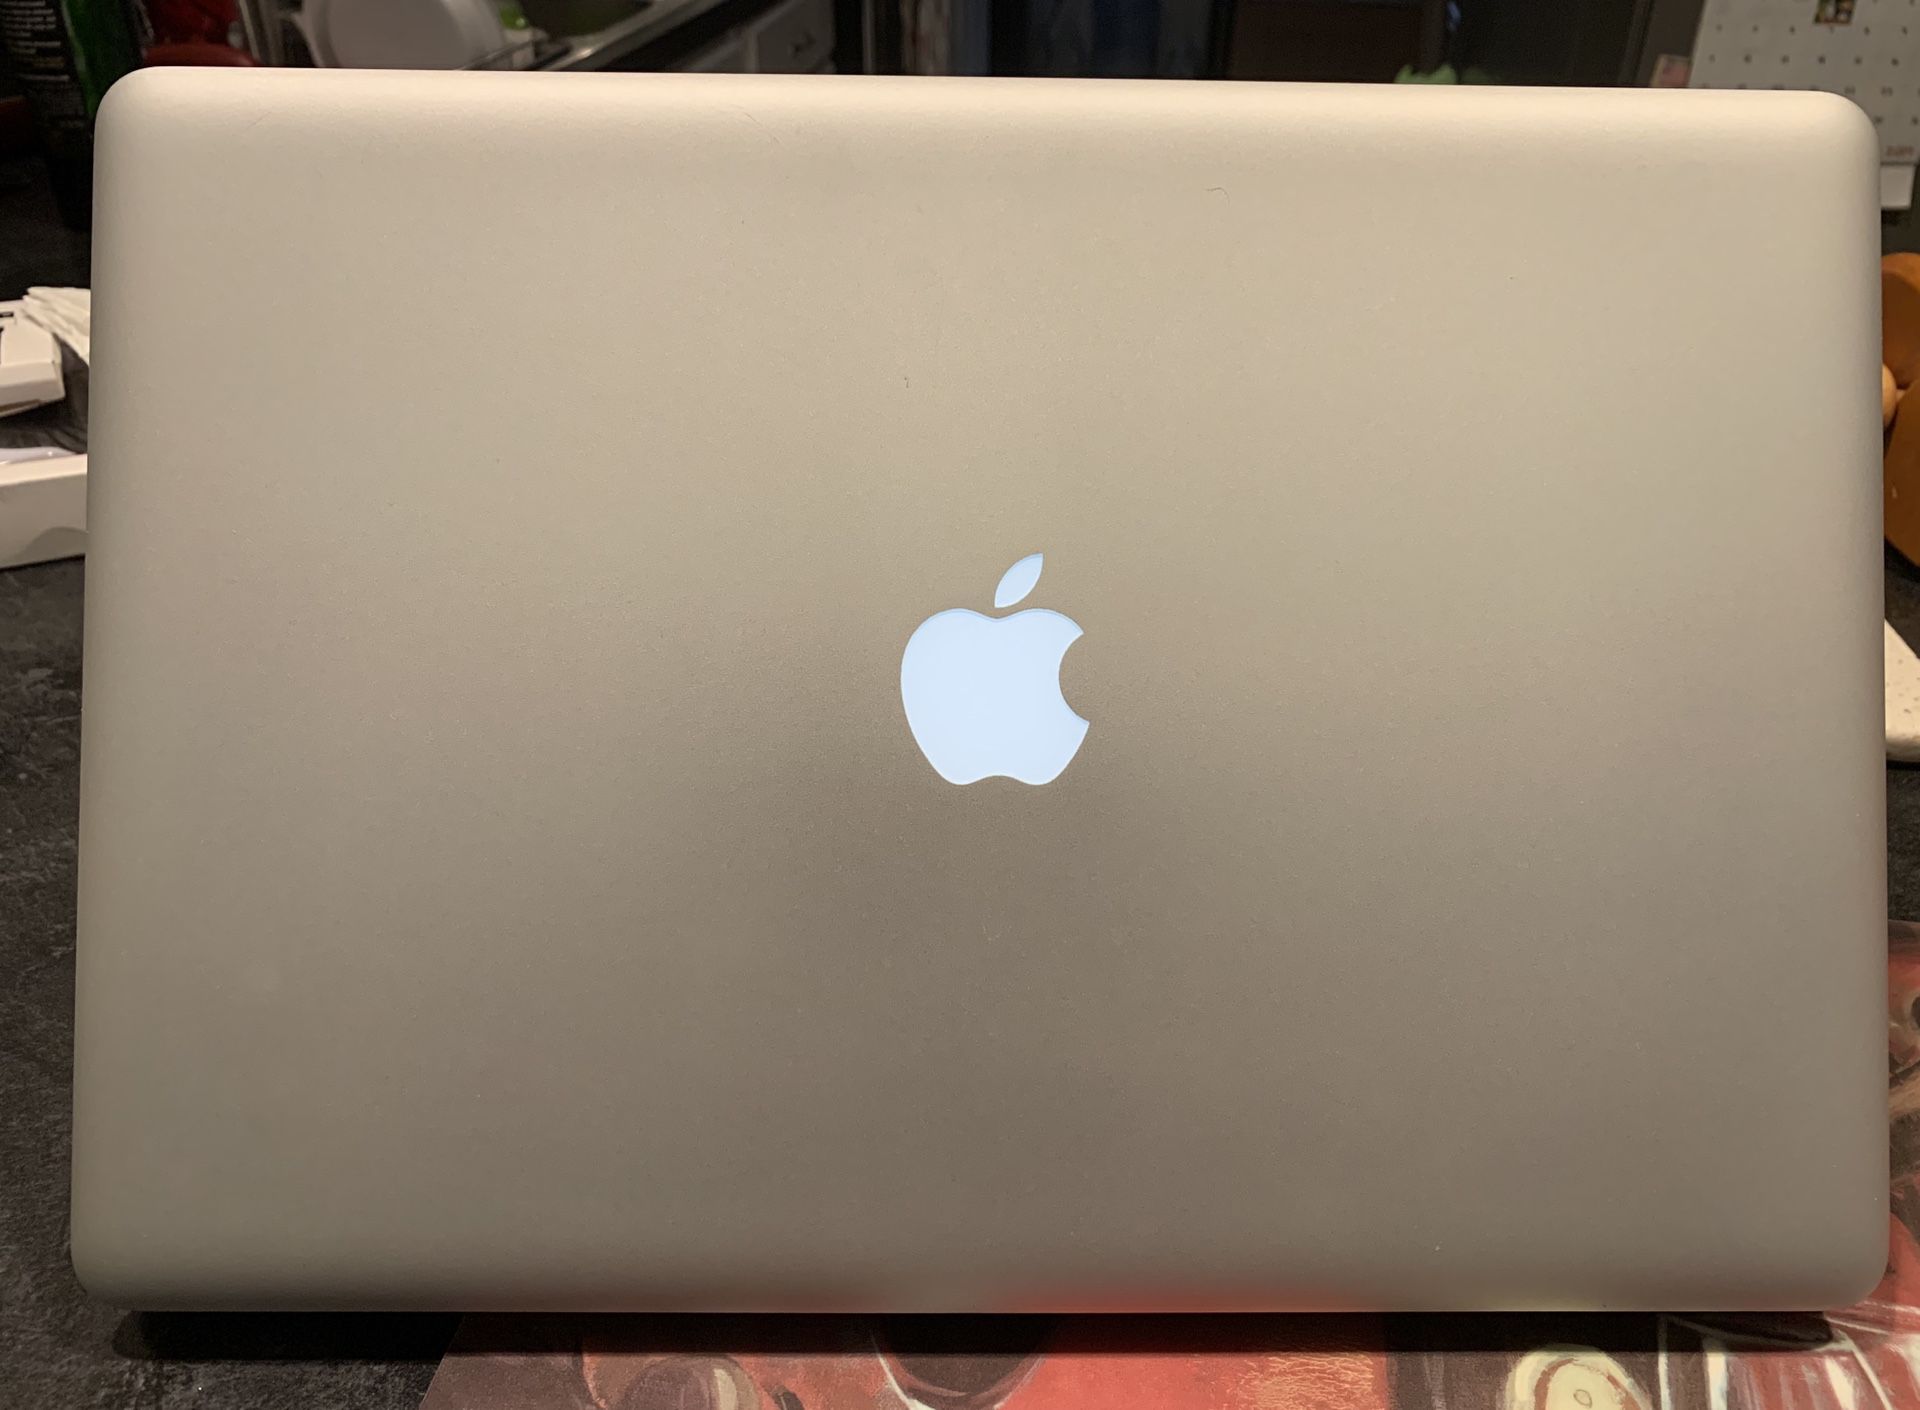 MacBook Pro 17 inches-900 dollars